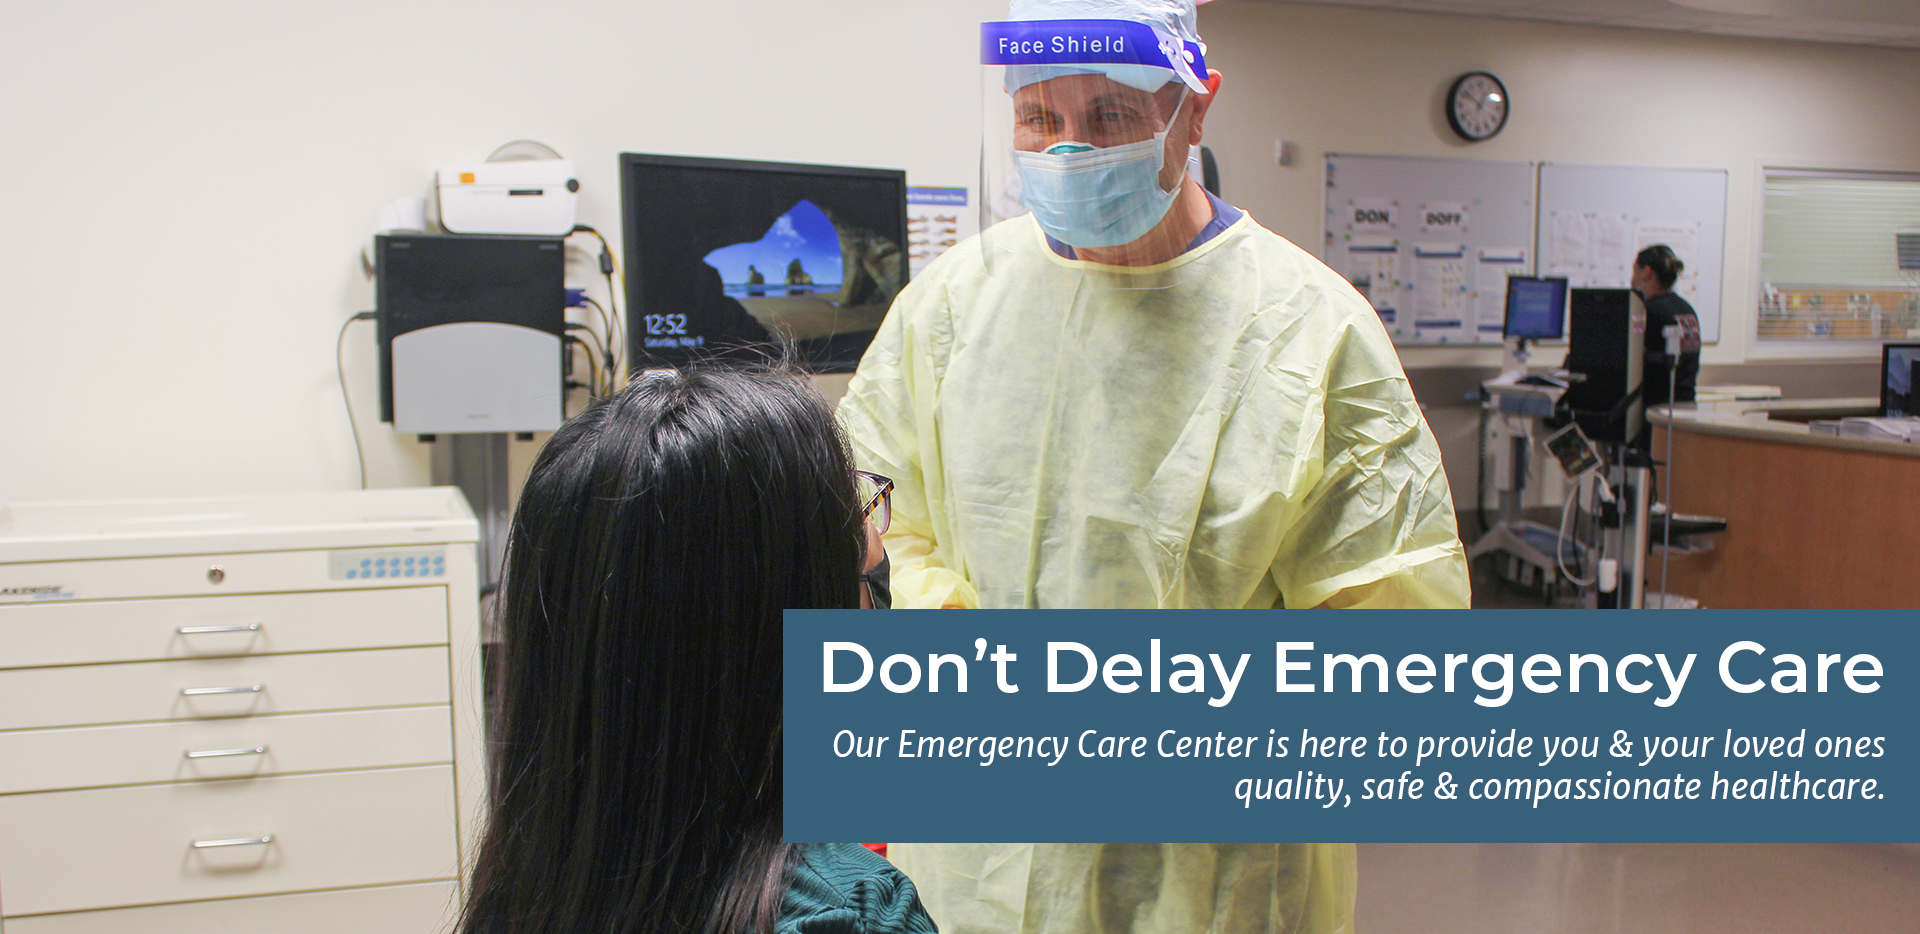 Graphic detailing "Don't Delay Emergency Care" with ER physician in PPE smiling at patient